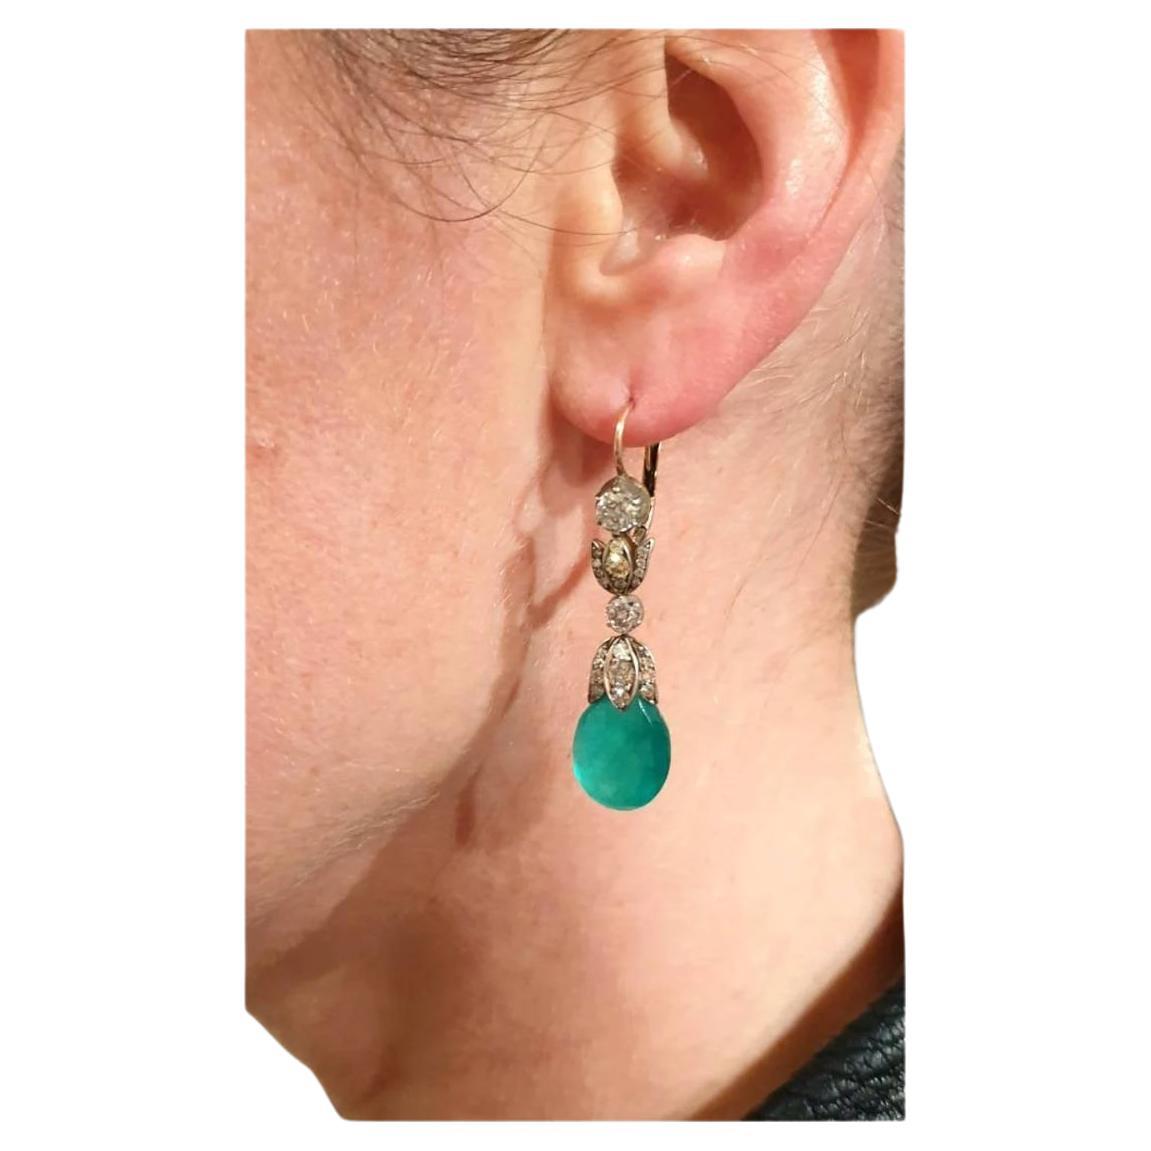 Antique 14k gold earrings with 2 dangling green emerald in pear shape with an estimate emerald weight of 5 carats and old cut diamond weight of 2.5 carats H color vs clearity total earrings length 4.5cm hall marked 56 imperial Russian gold standard